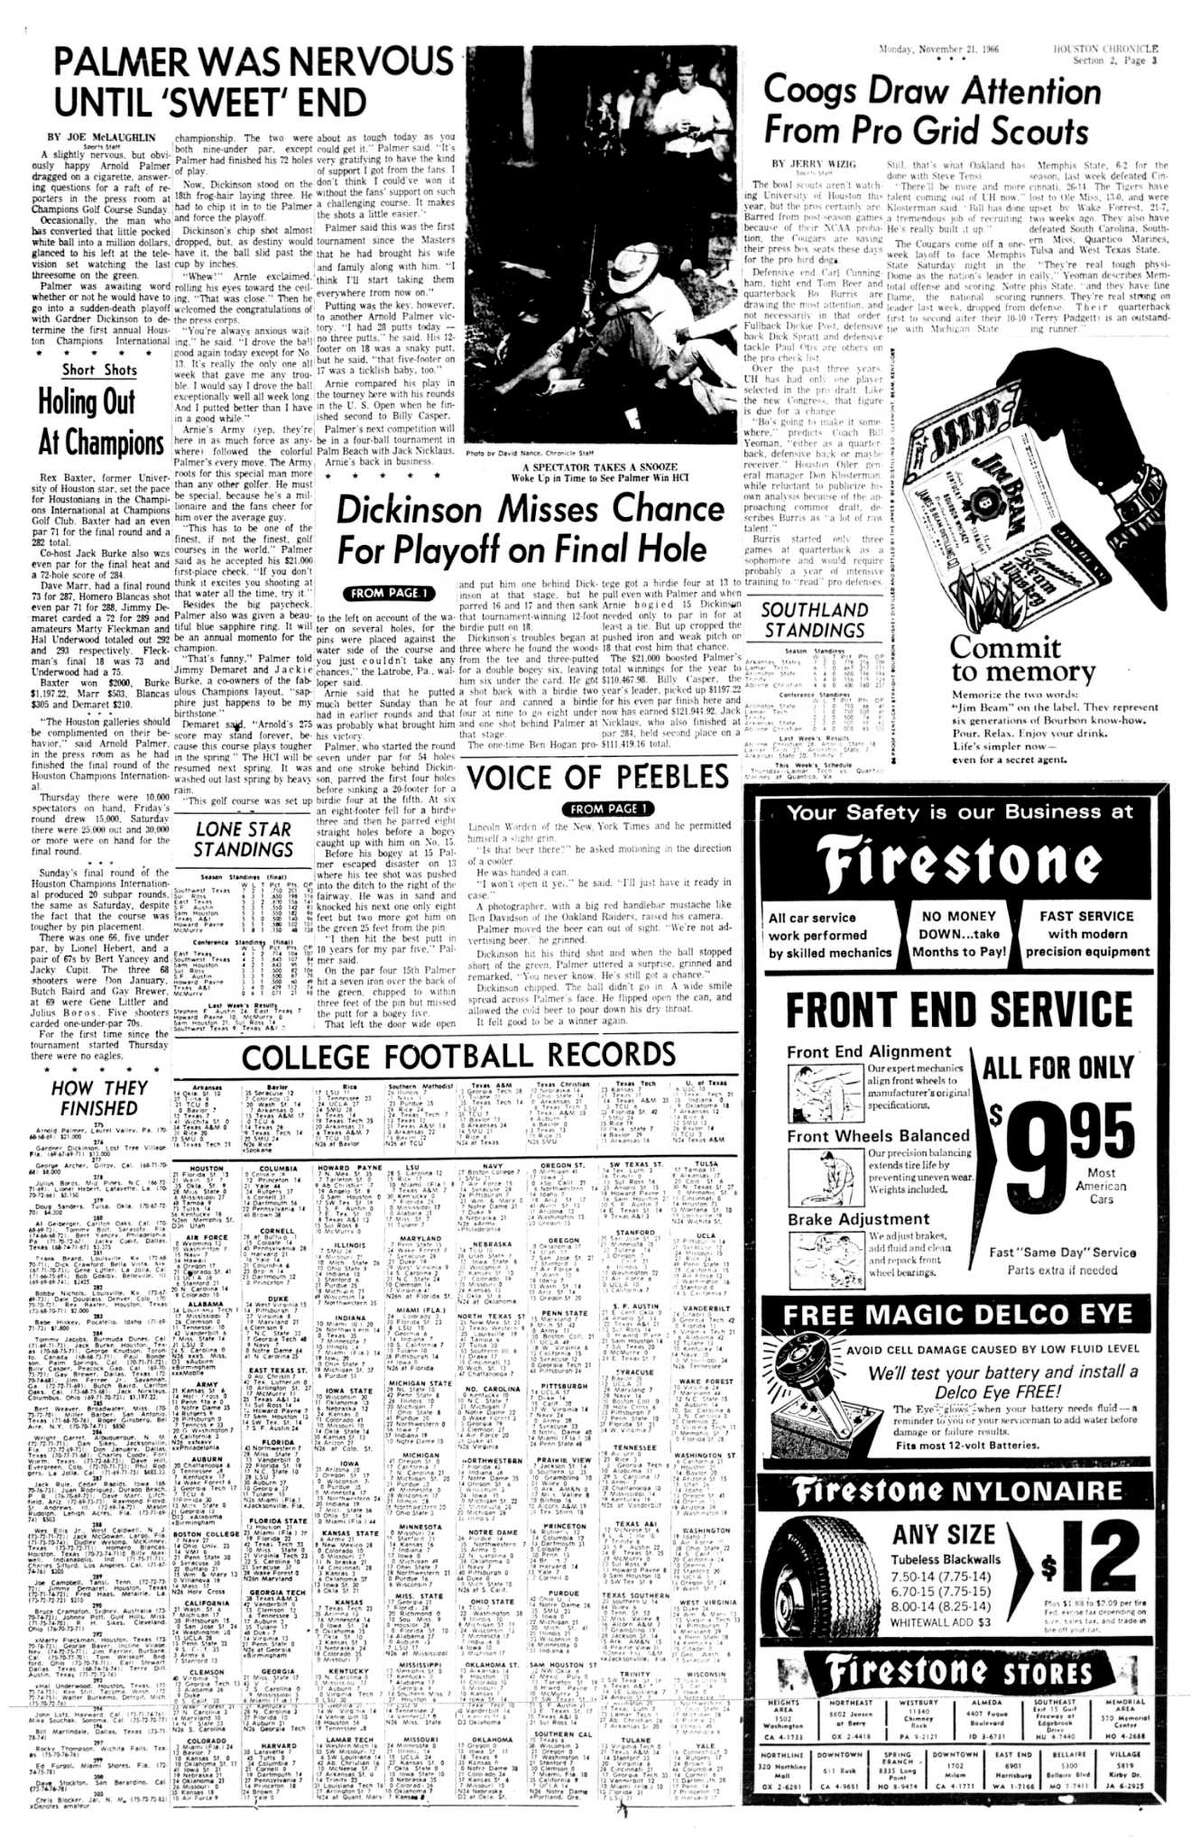 Houston Chronicle inside page - November 21, 1966 - section 2, page 3. Dickinson Misses Chance For Playoff on Final Hole. PALMER WAS NERVOUS UNTIL 'SWEET' END. Holing Out At Champions.